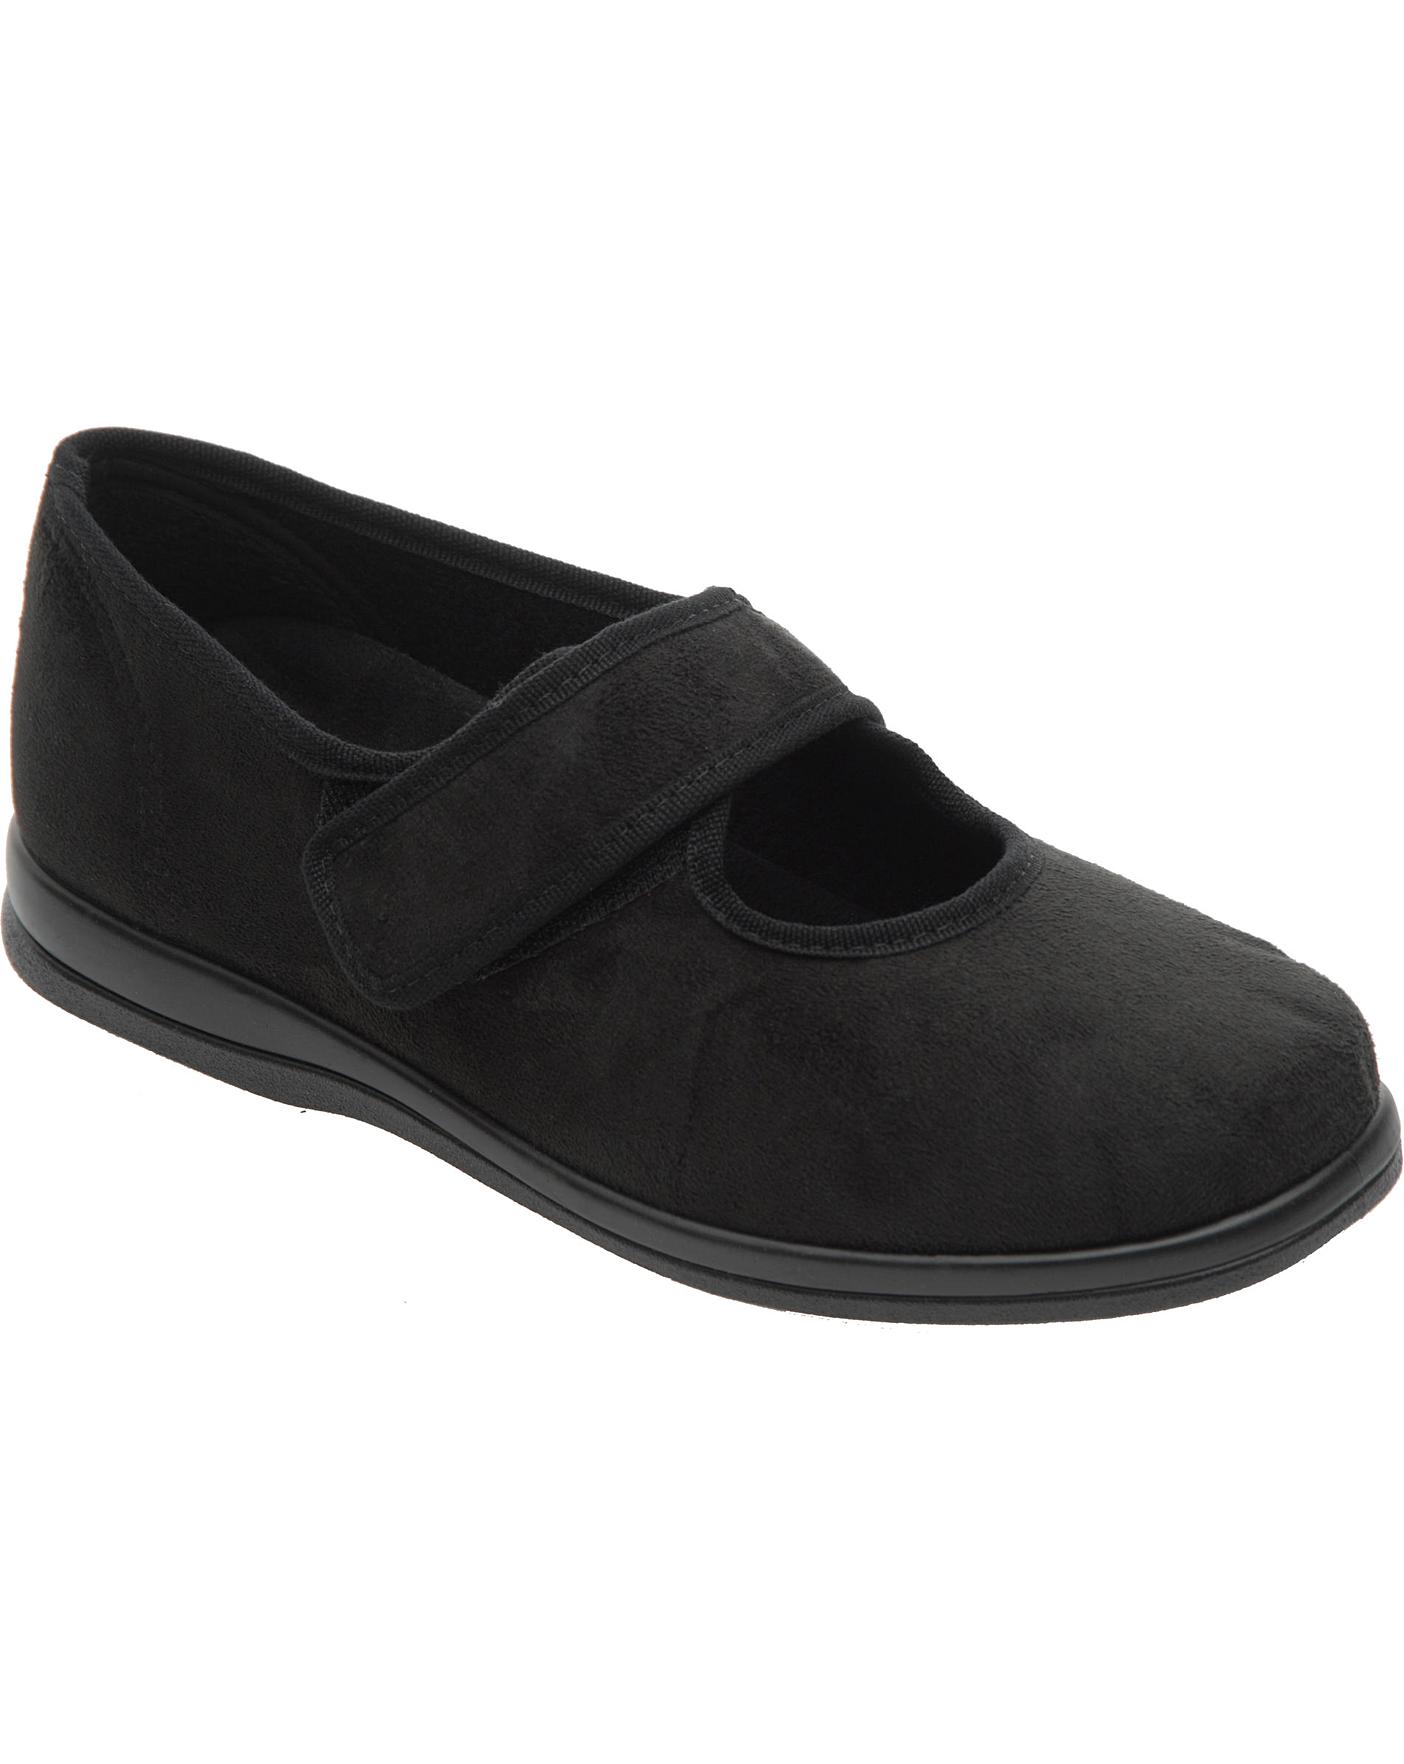 cosyfeet extra wide ladies shoes